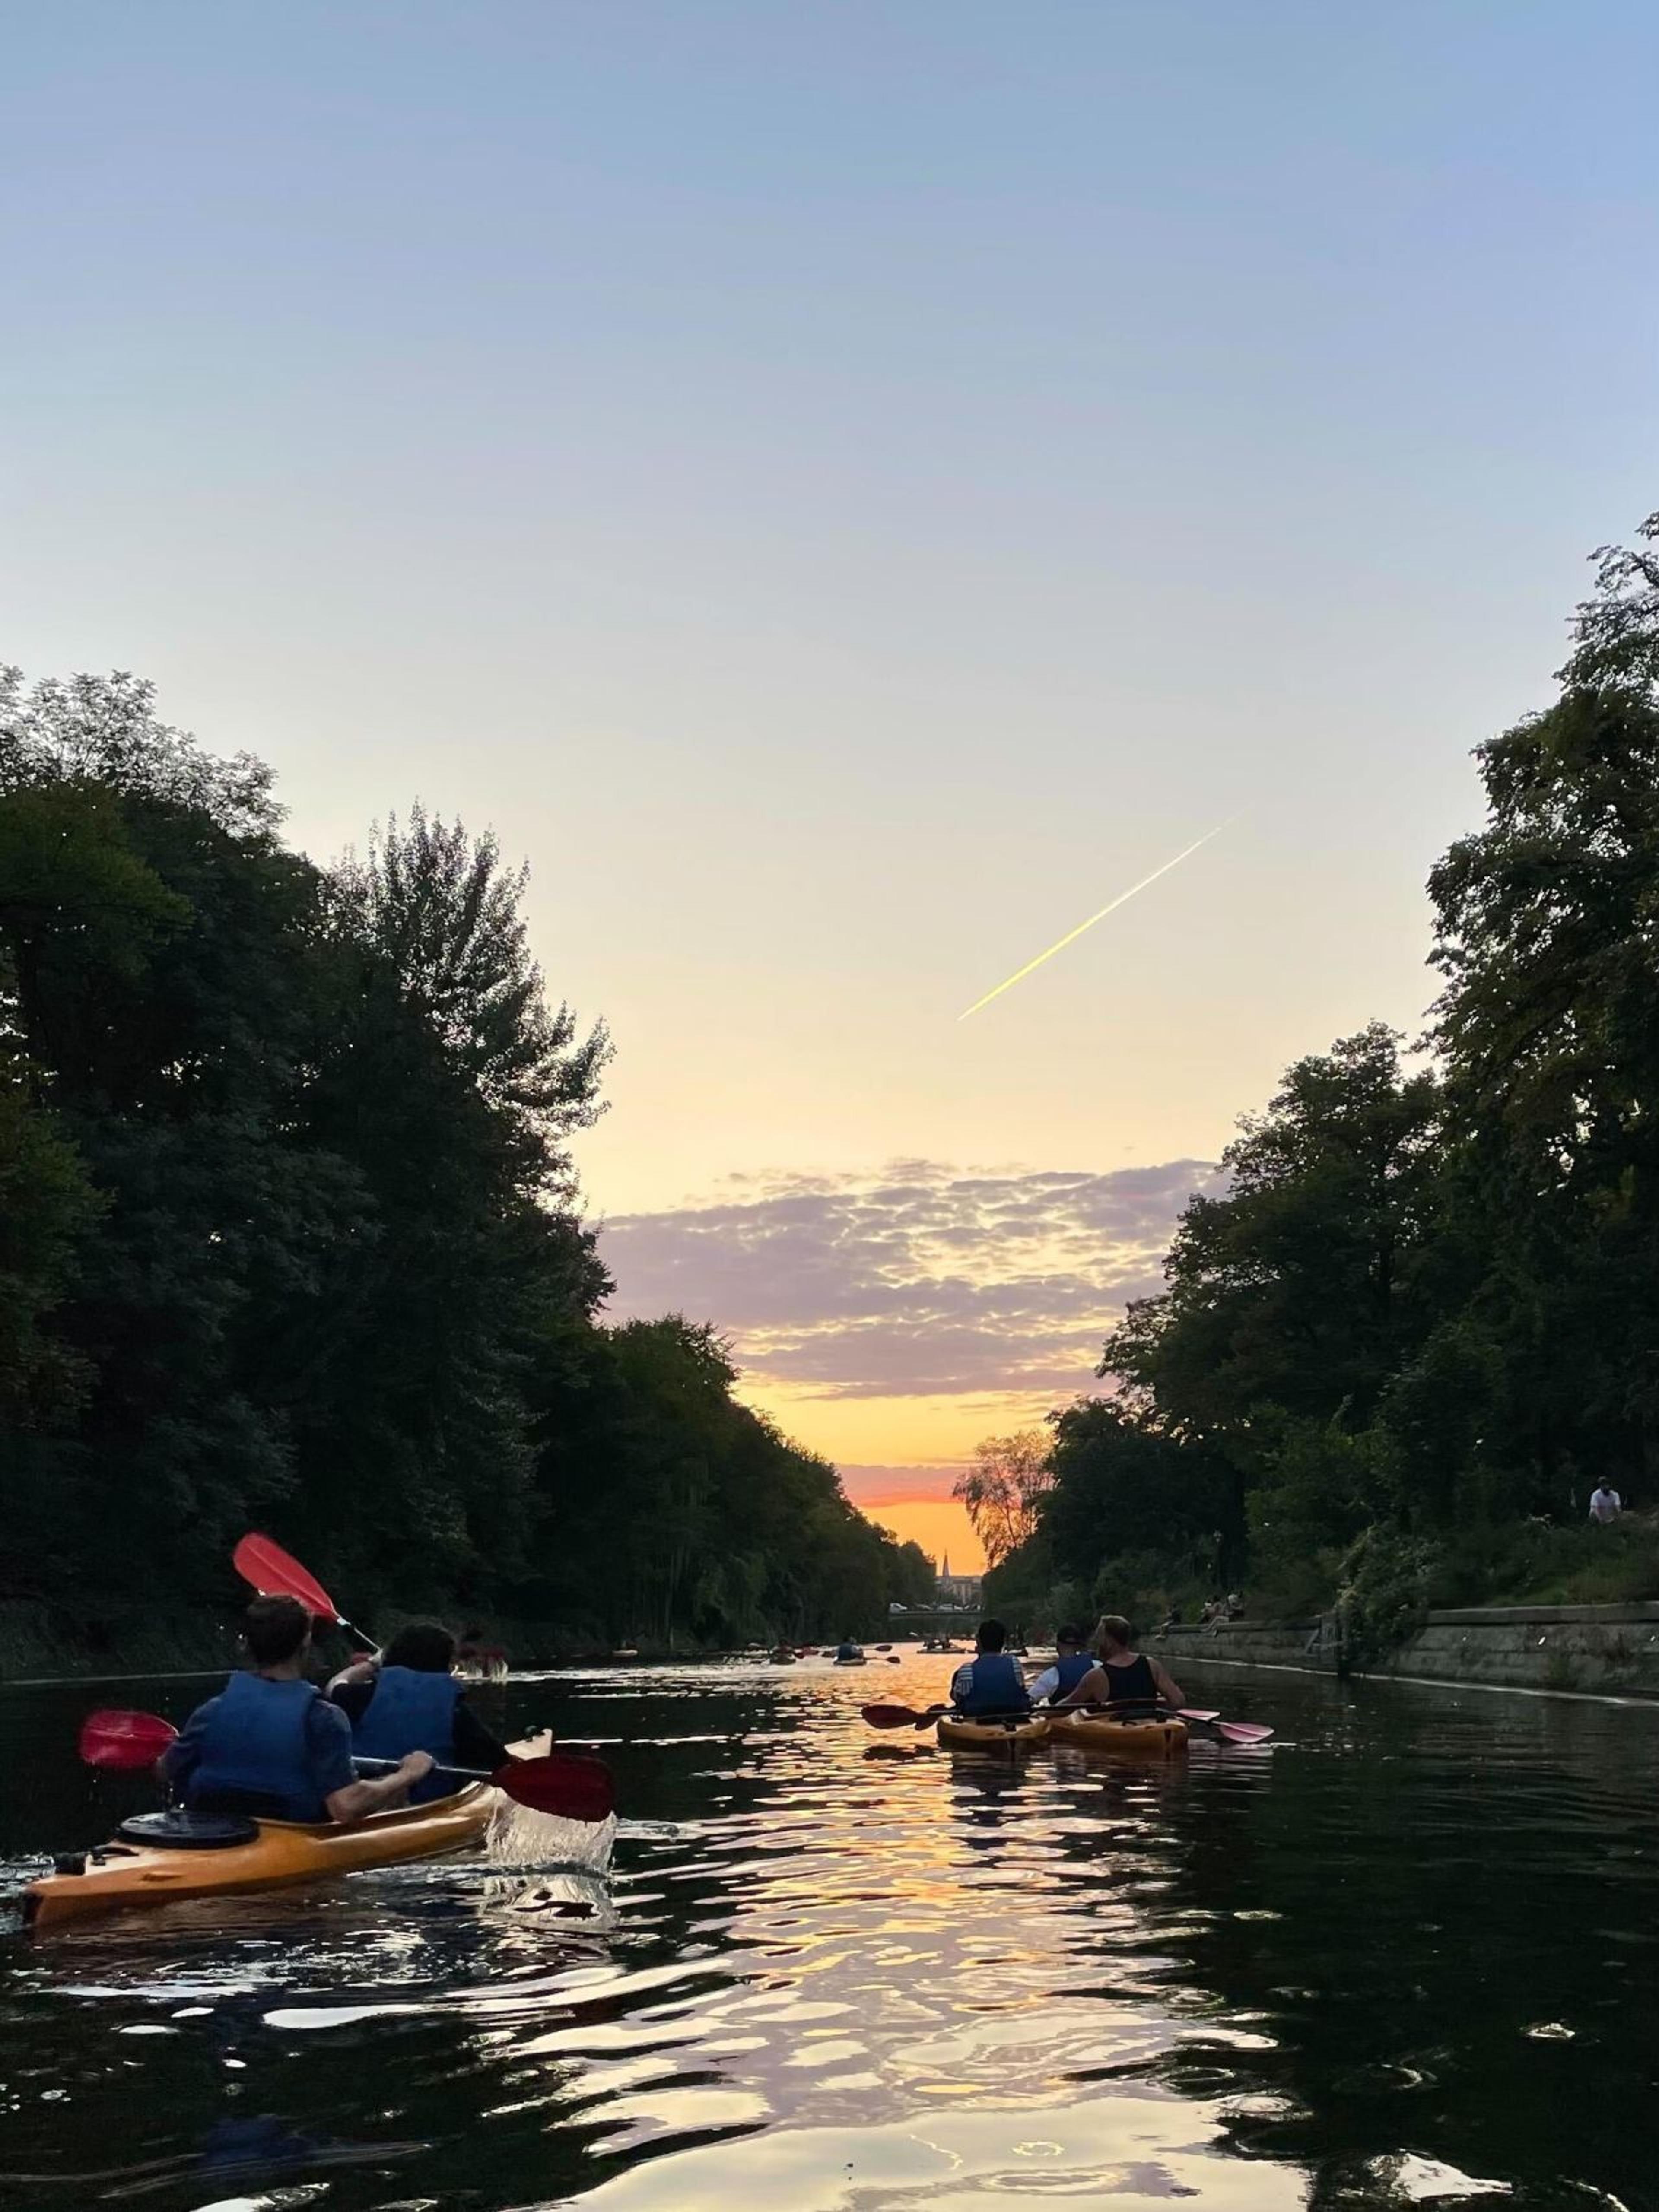 The Operations team kayaked down Landwehrkanal and enjoyed the late summer sunset.